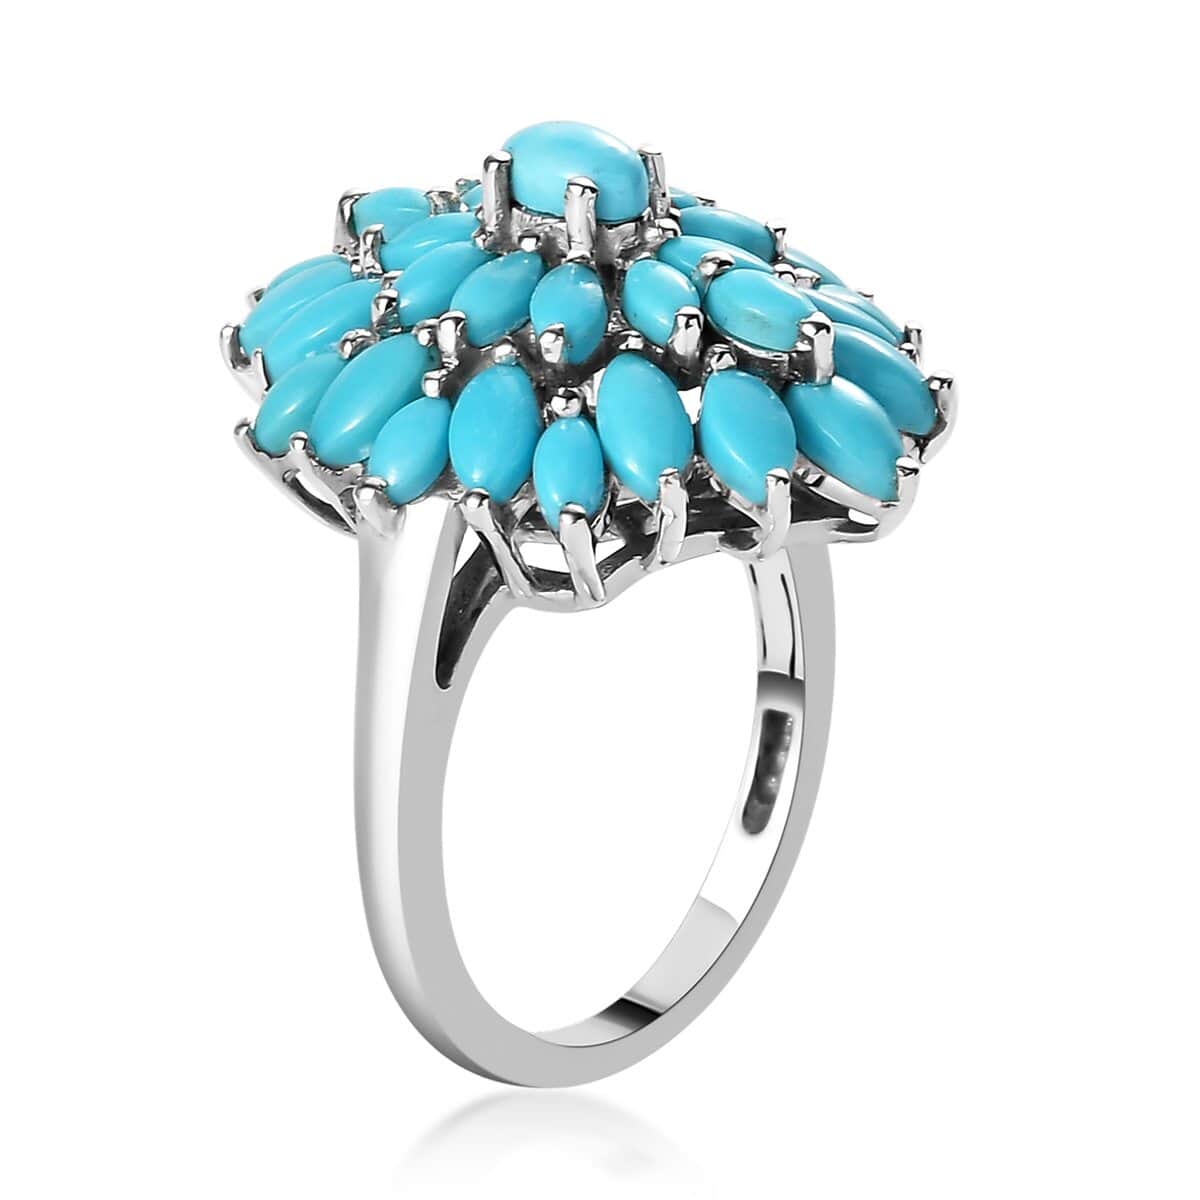 doorbuster-american-natural-sleeping-beauty-turquoise-floral-spray-ring-in-platinum-over-sterling-silver-size-10.0-3.75-ctw image number 3